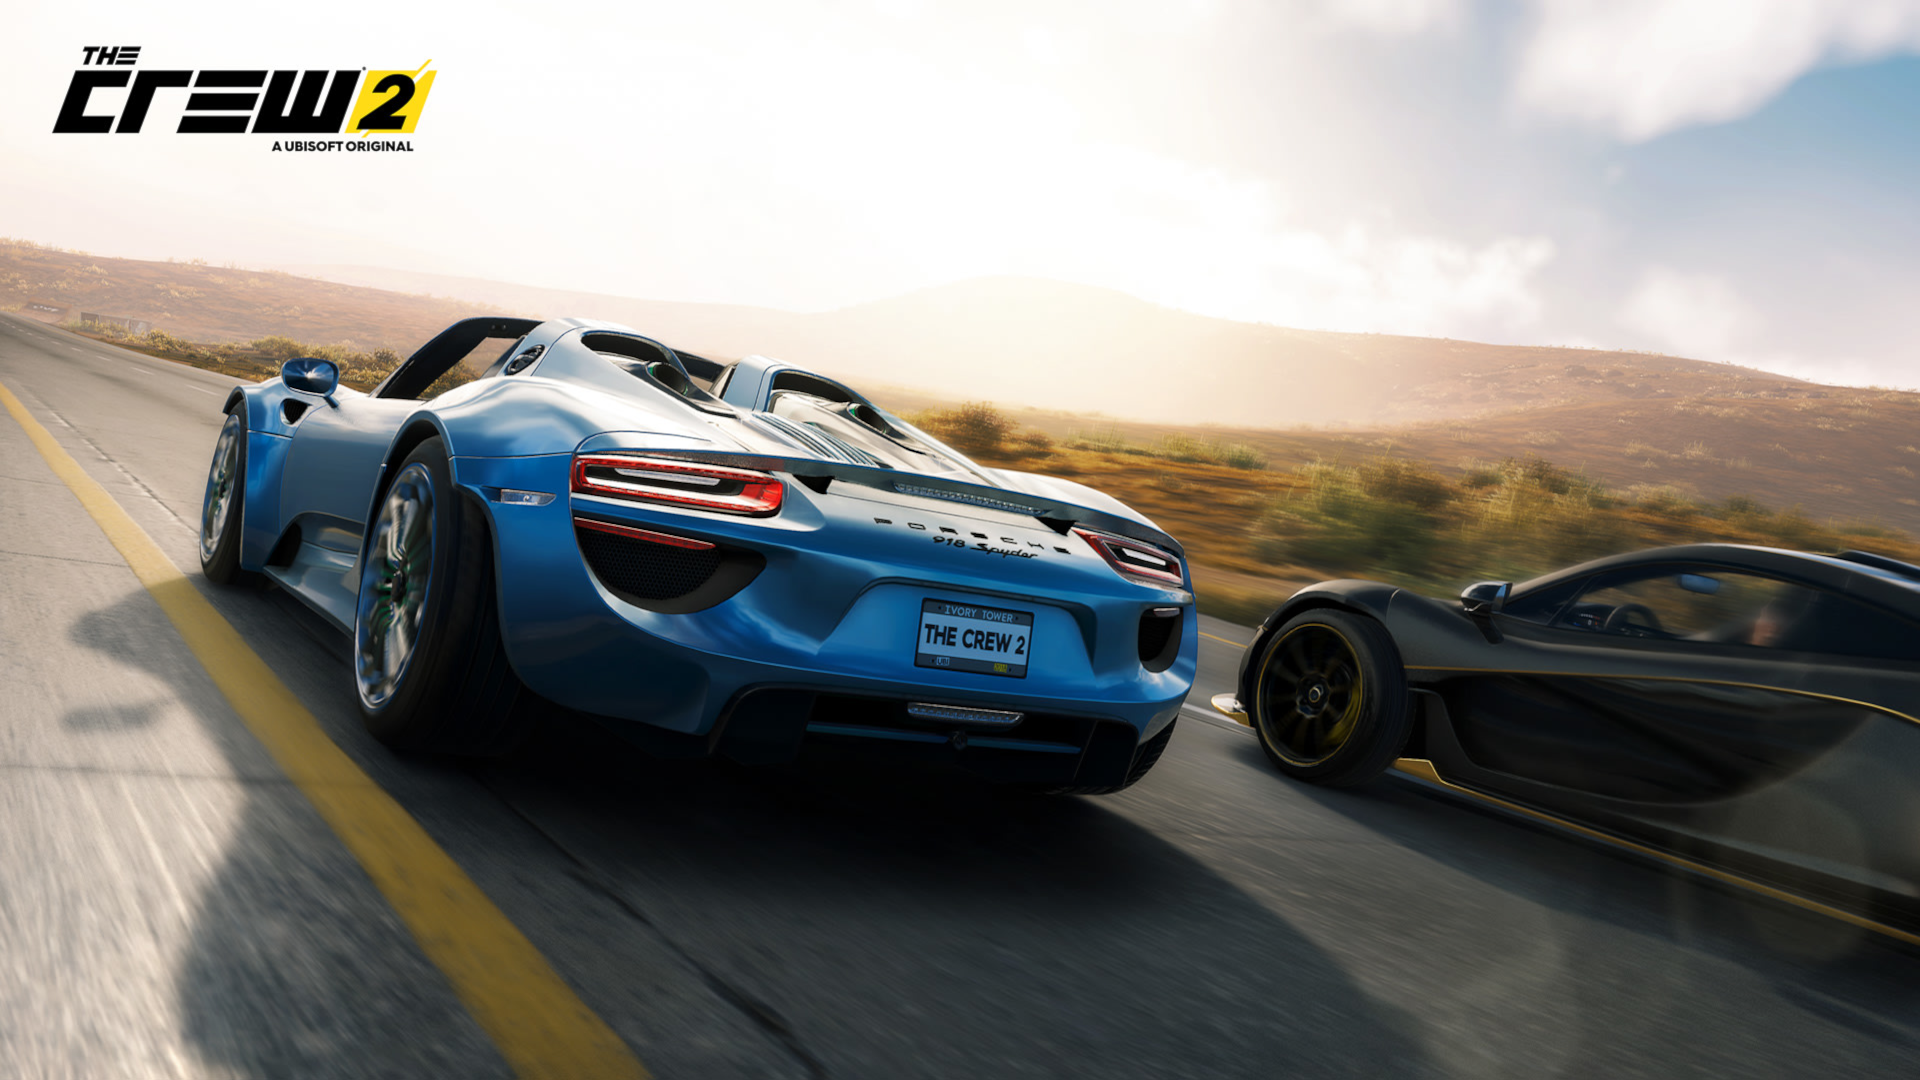 100+ The Crew 2 Hd Wallpapers And Backgrounds